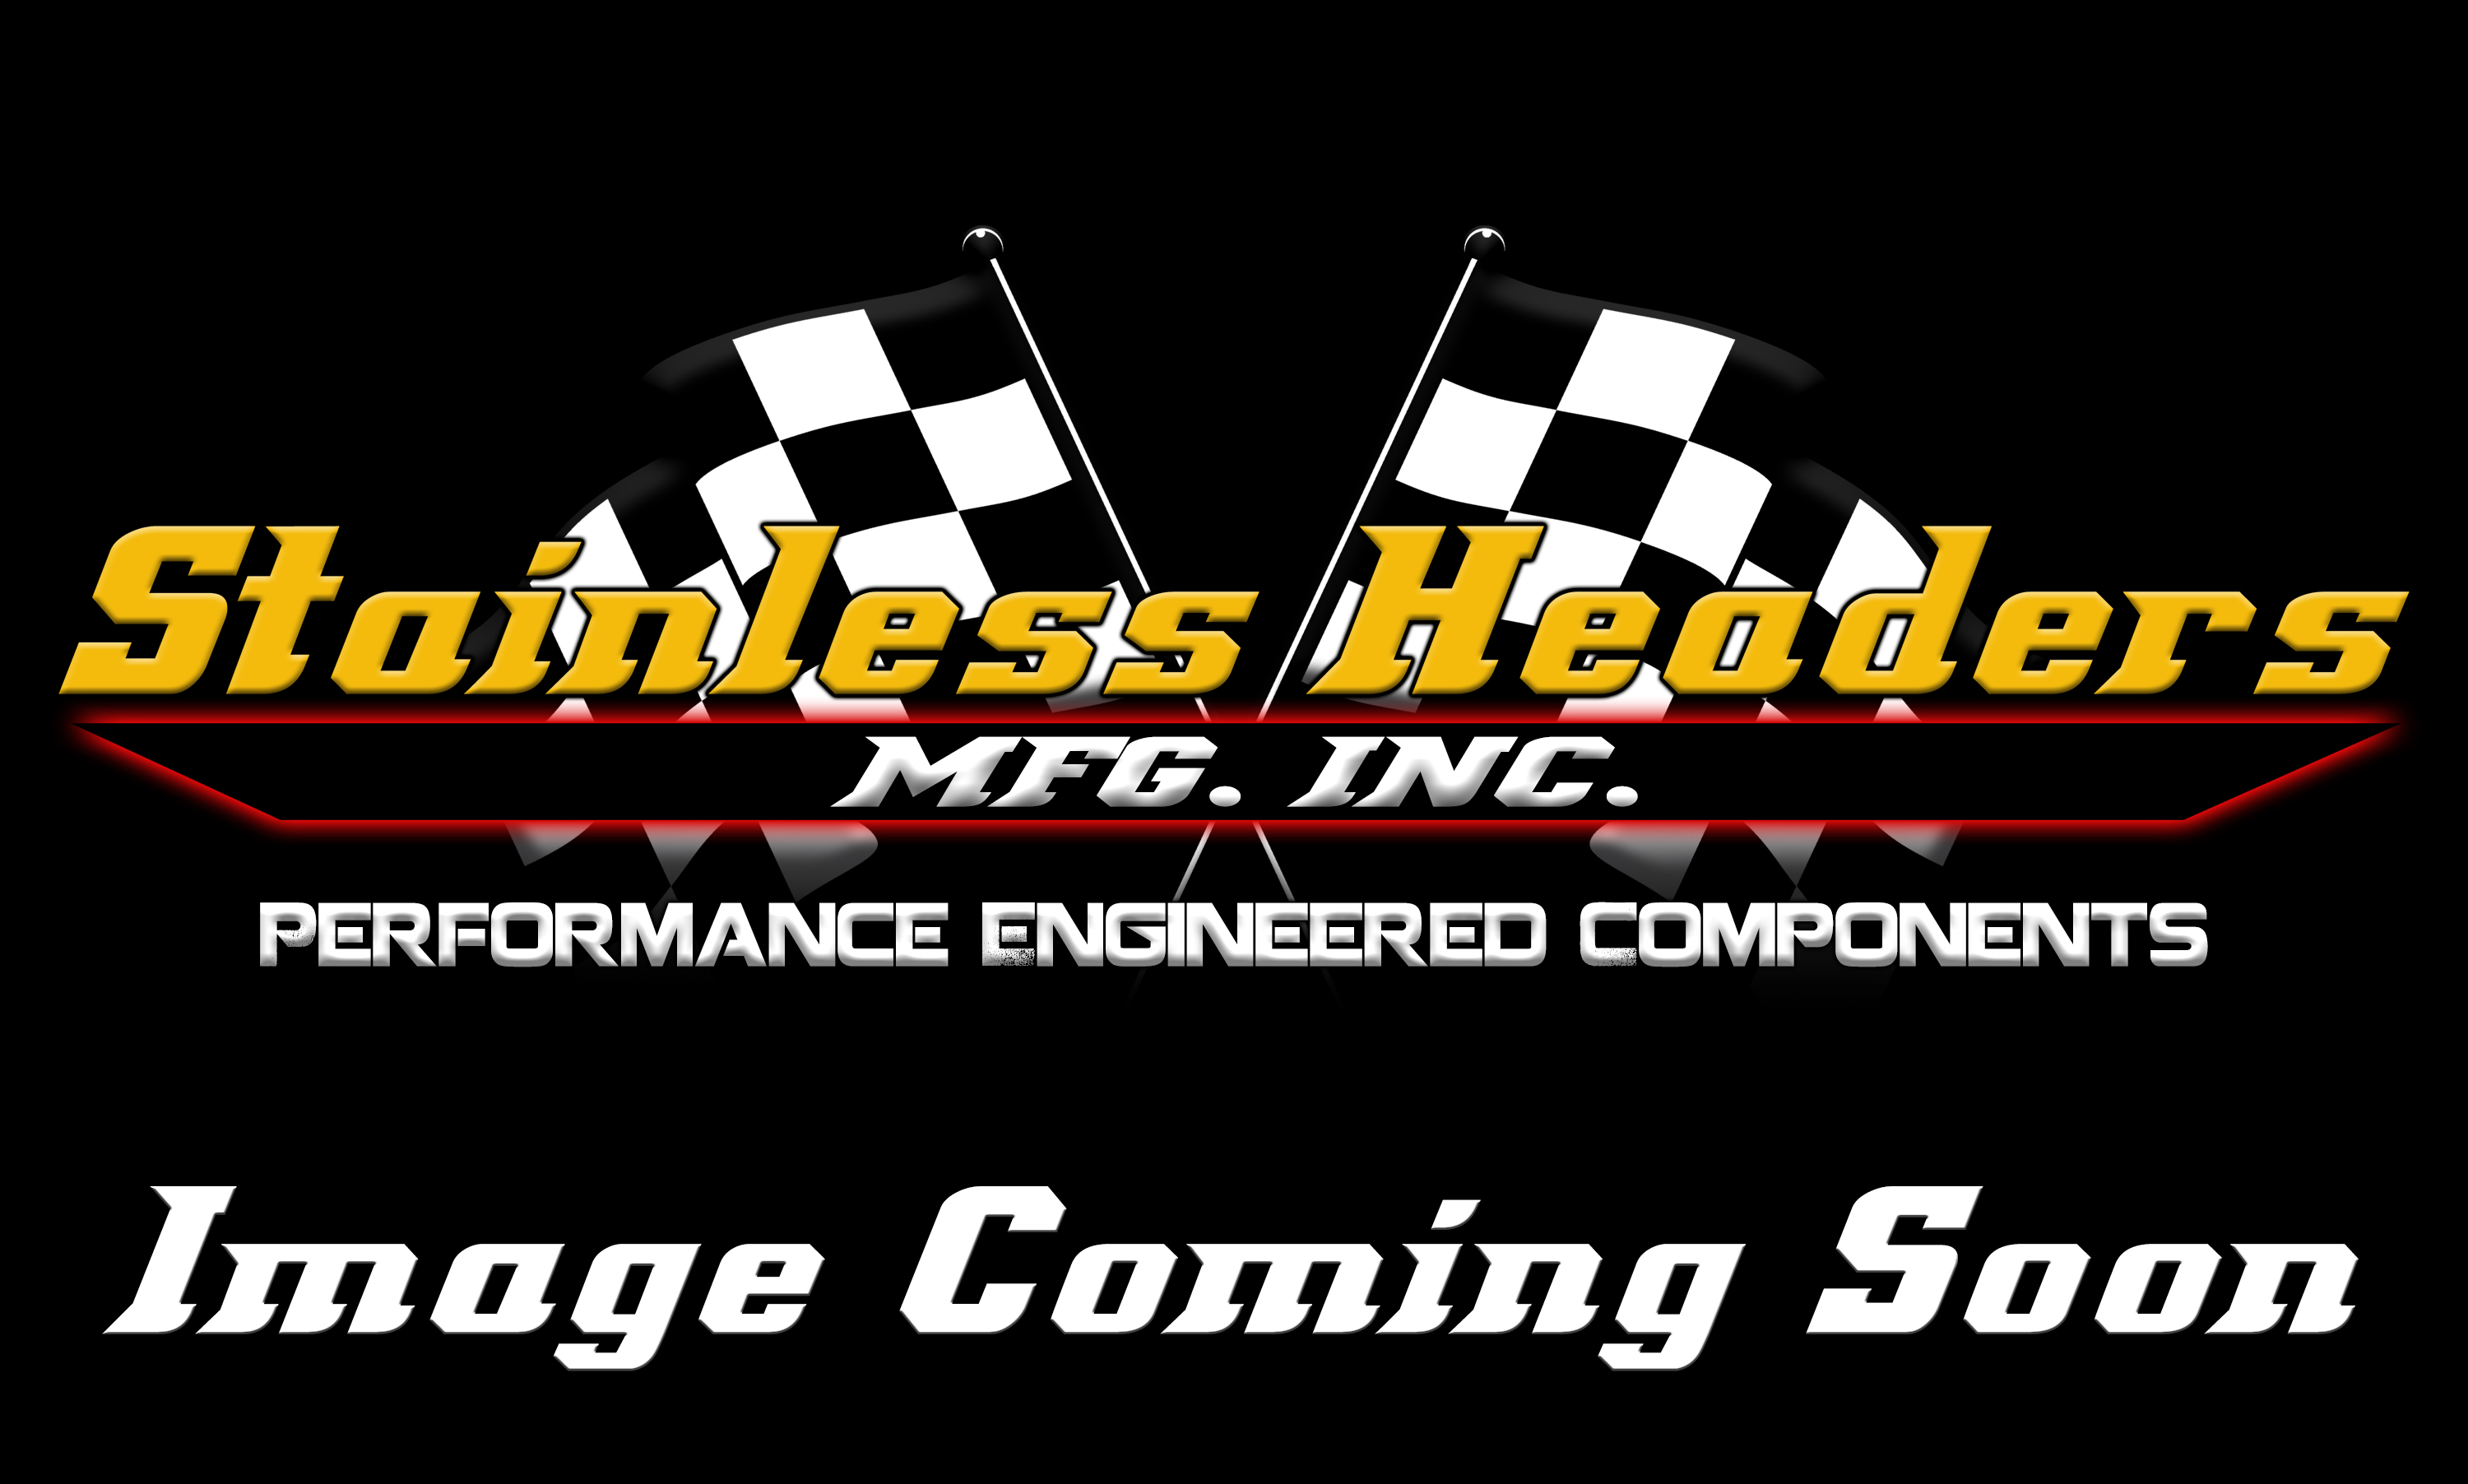 CompTurbo Technology Turbochargers - Comp Turbo Journal Bearing Turbochargers - CompTurbo Technologies - CTR3893S-6767 Reverse Rotation 360 Journal Bearing Turbocharger (1000 HP)